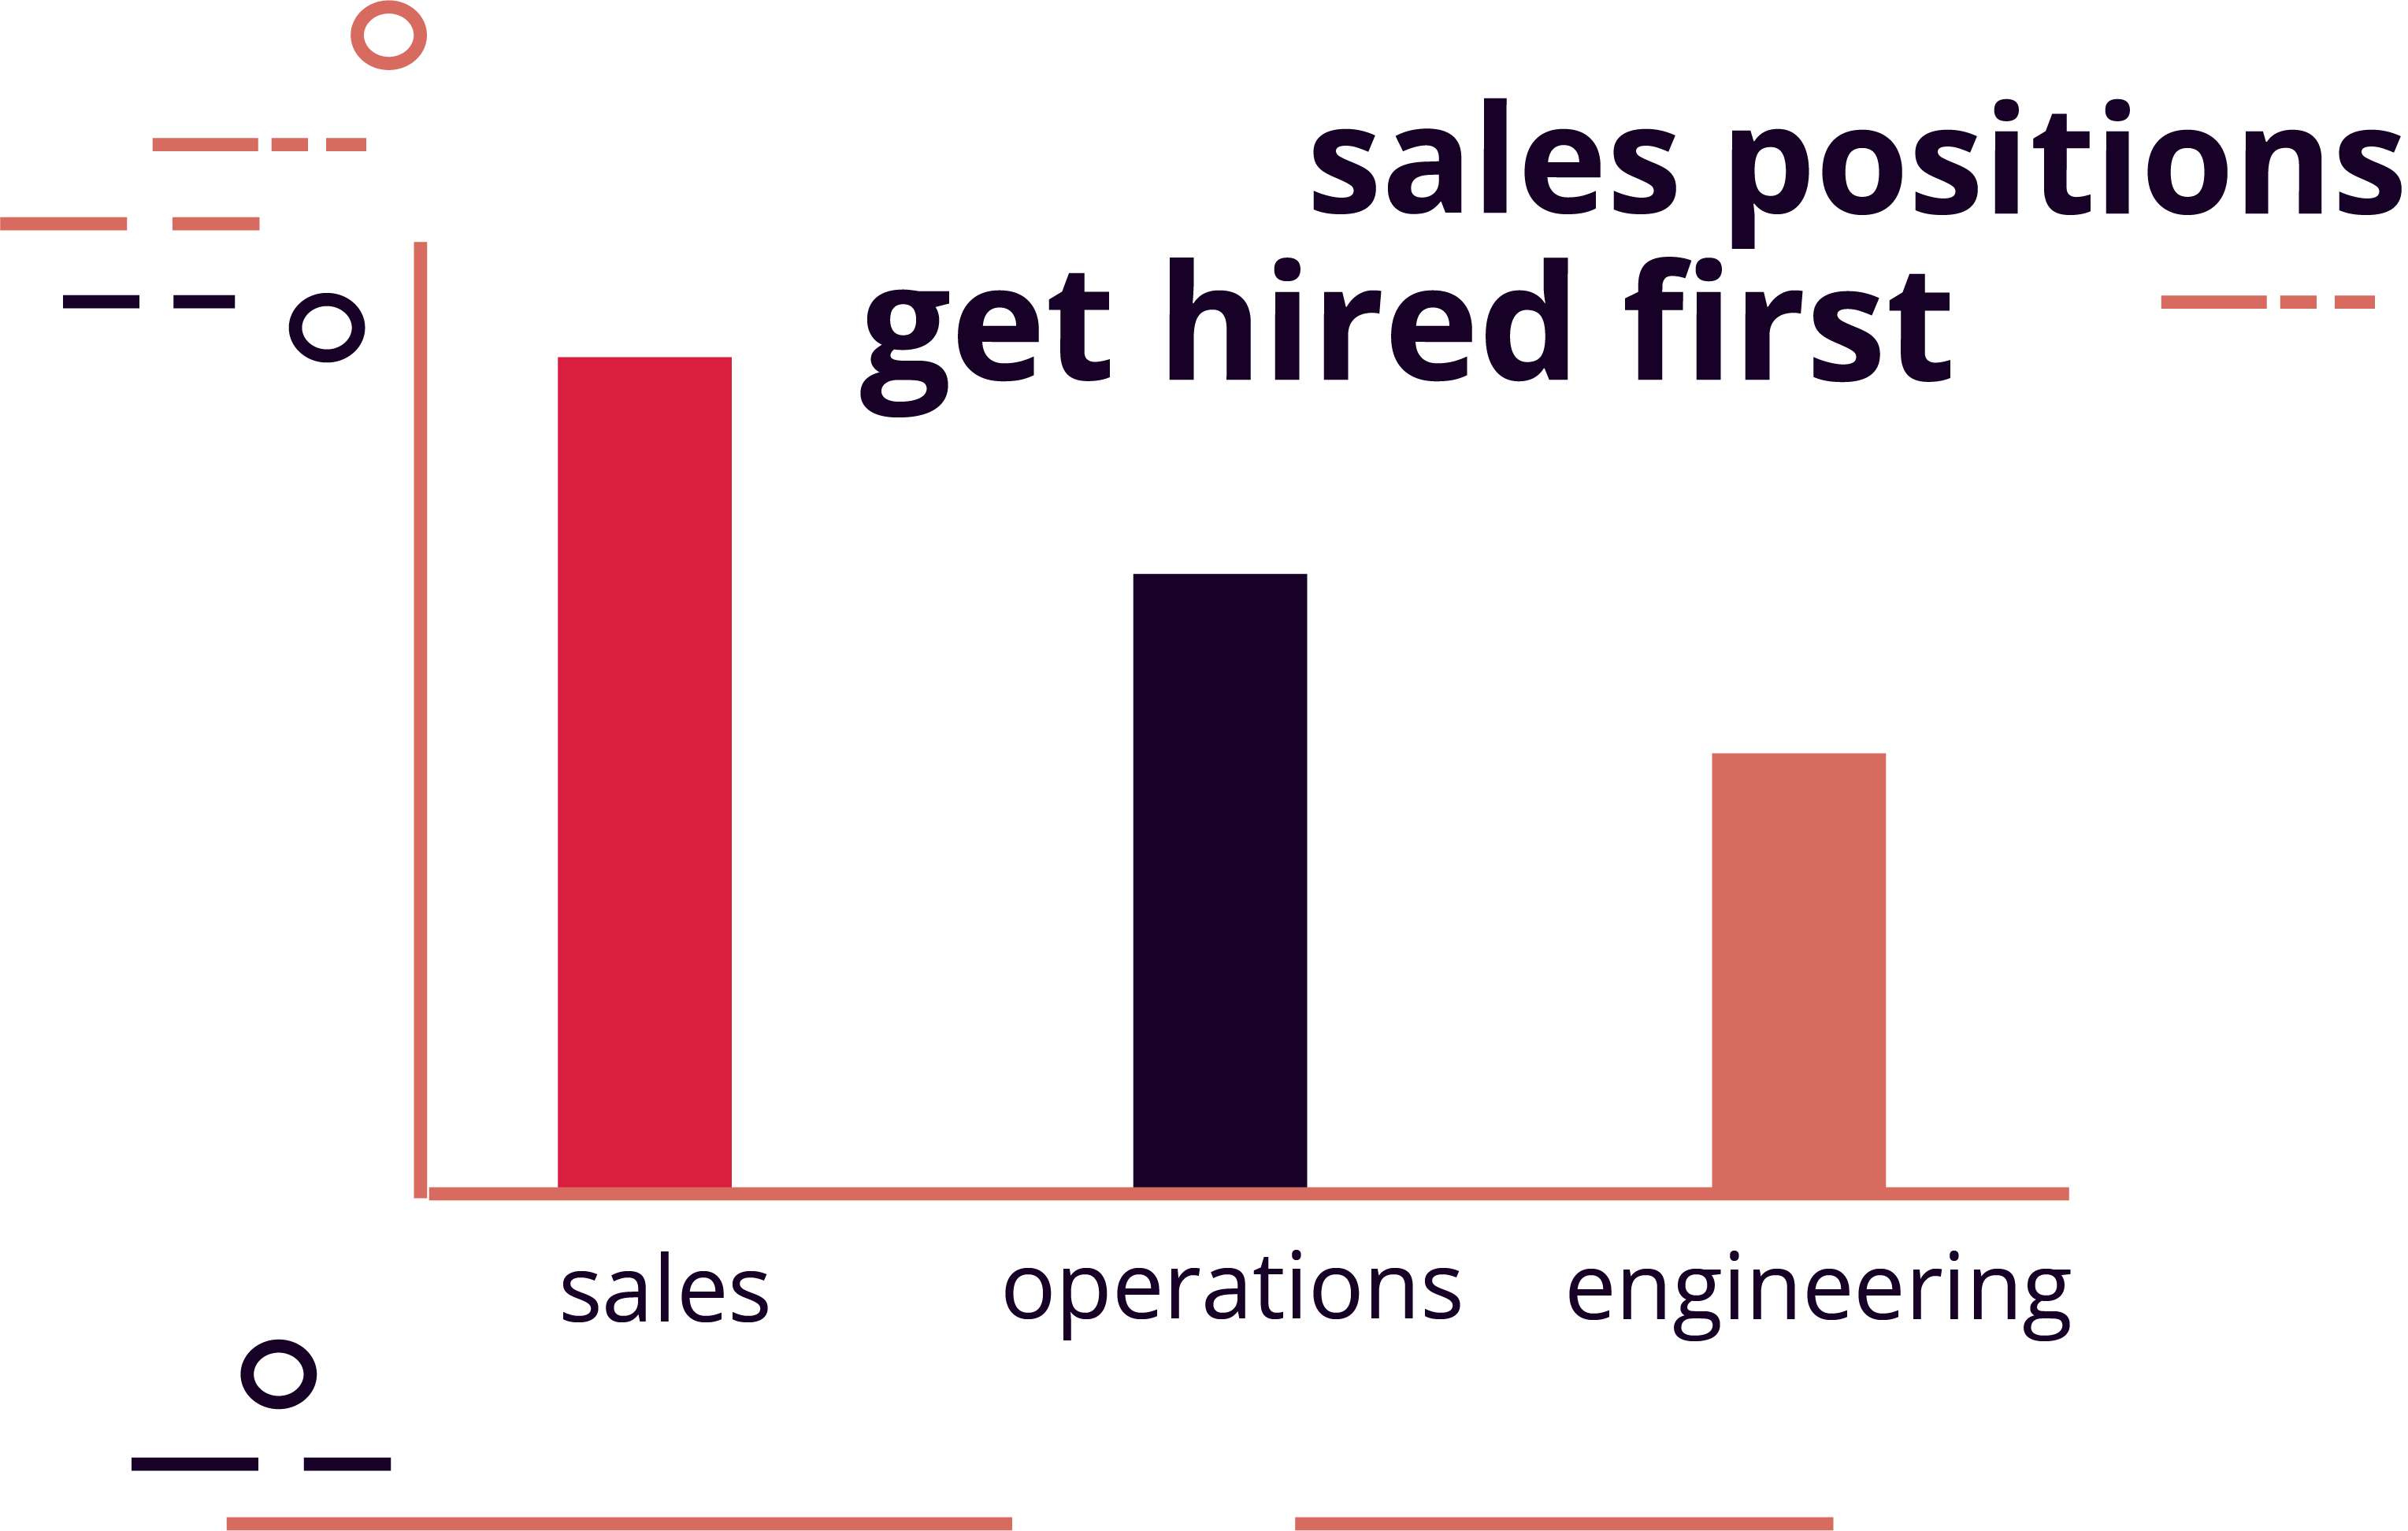 Sales positions get hired first